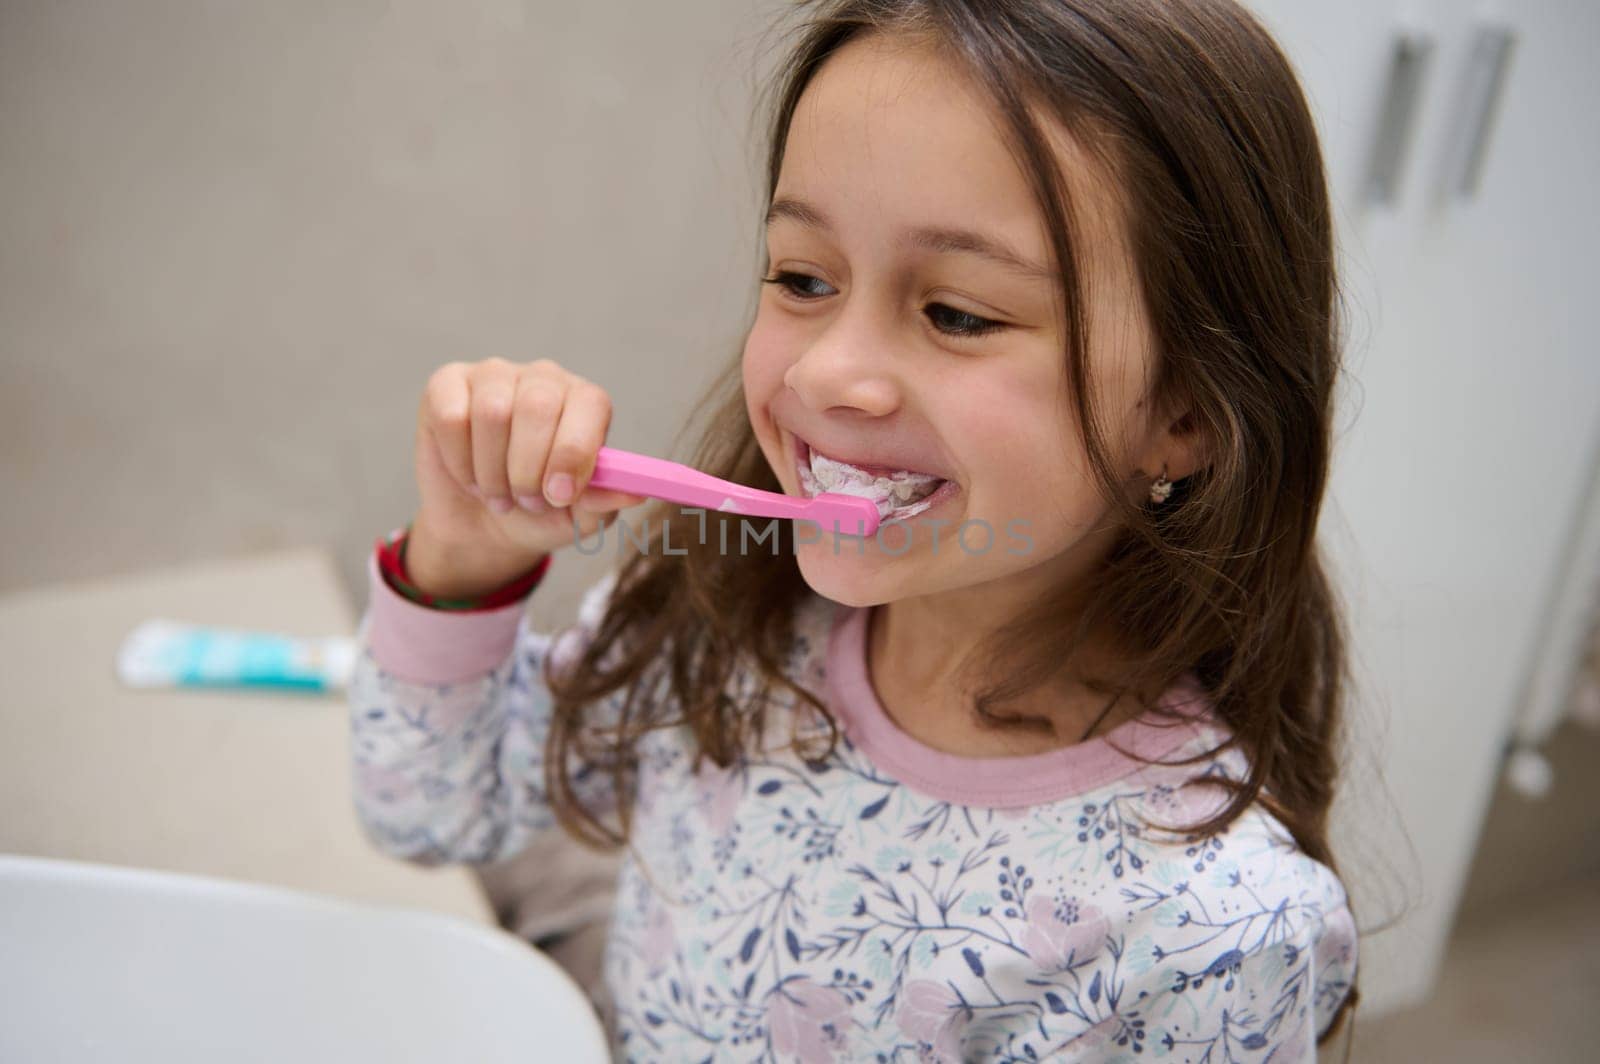 Adorable little child girl in pajamas, holding a toothbrush with toothpaste and brushing her white teeth in front of the mirror in the home bathroom. Healthy lifestyle. Dental oral care and hygiene